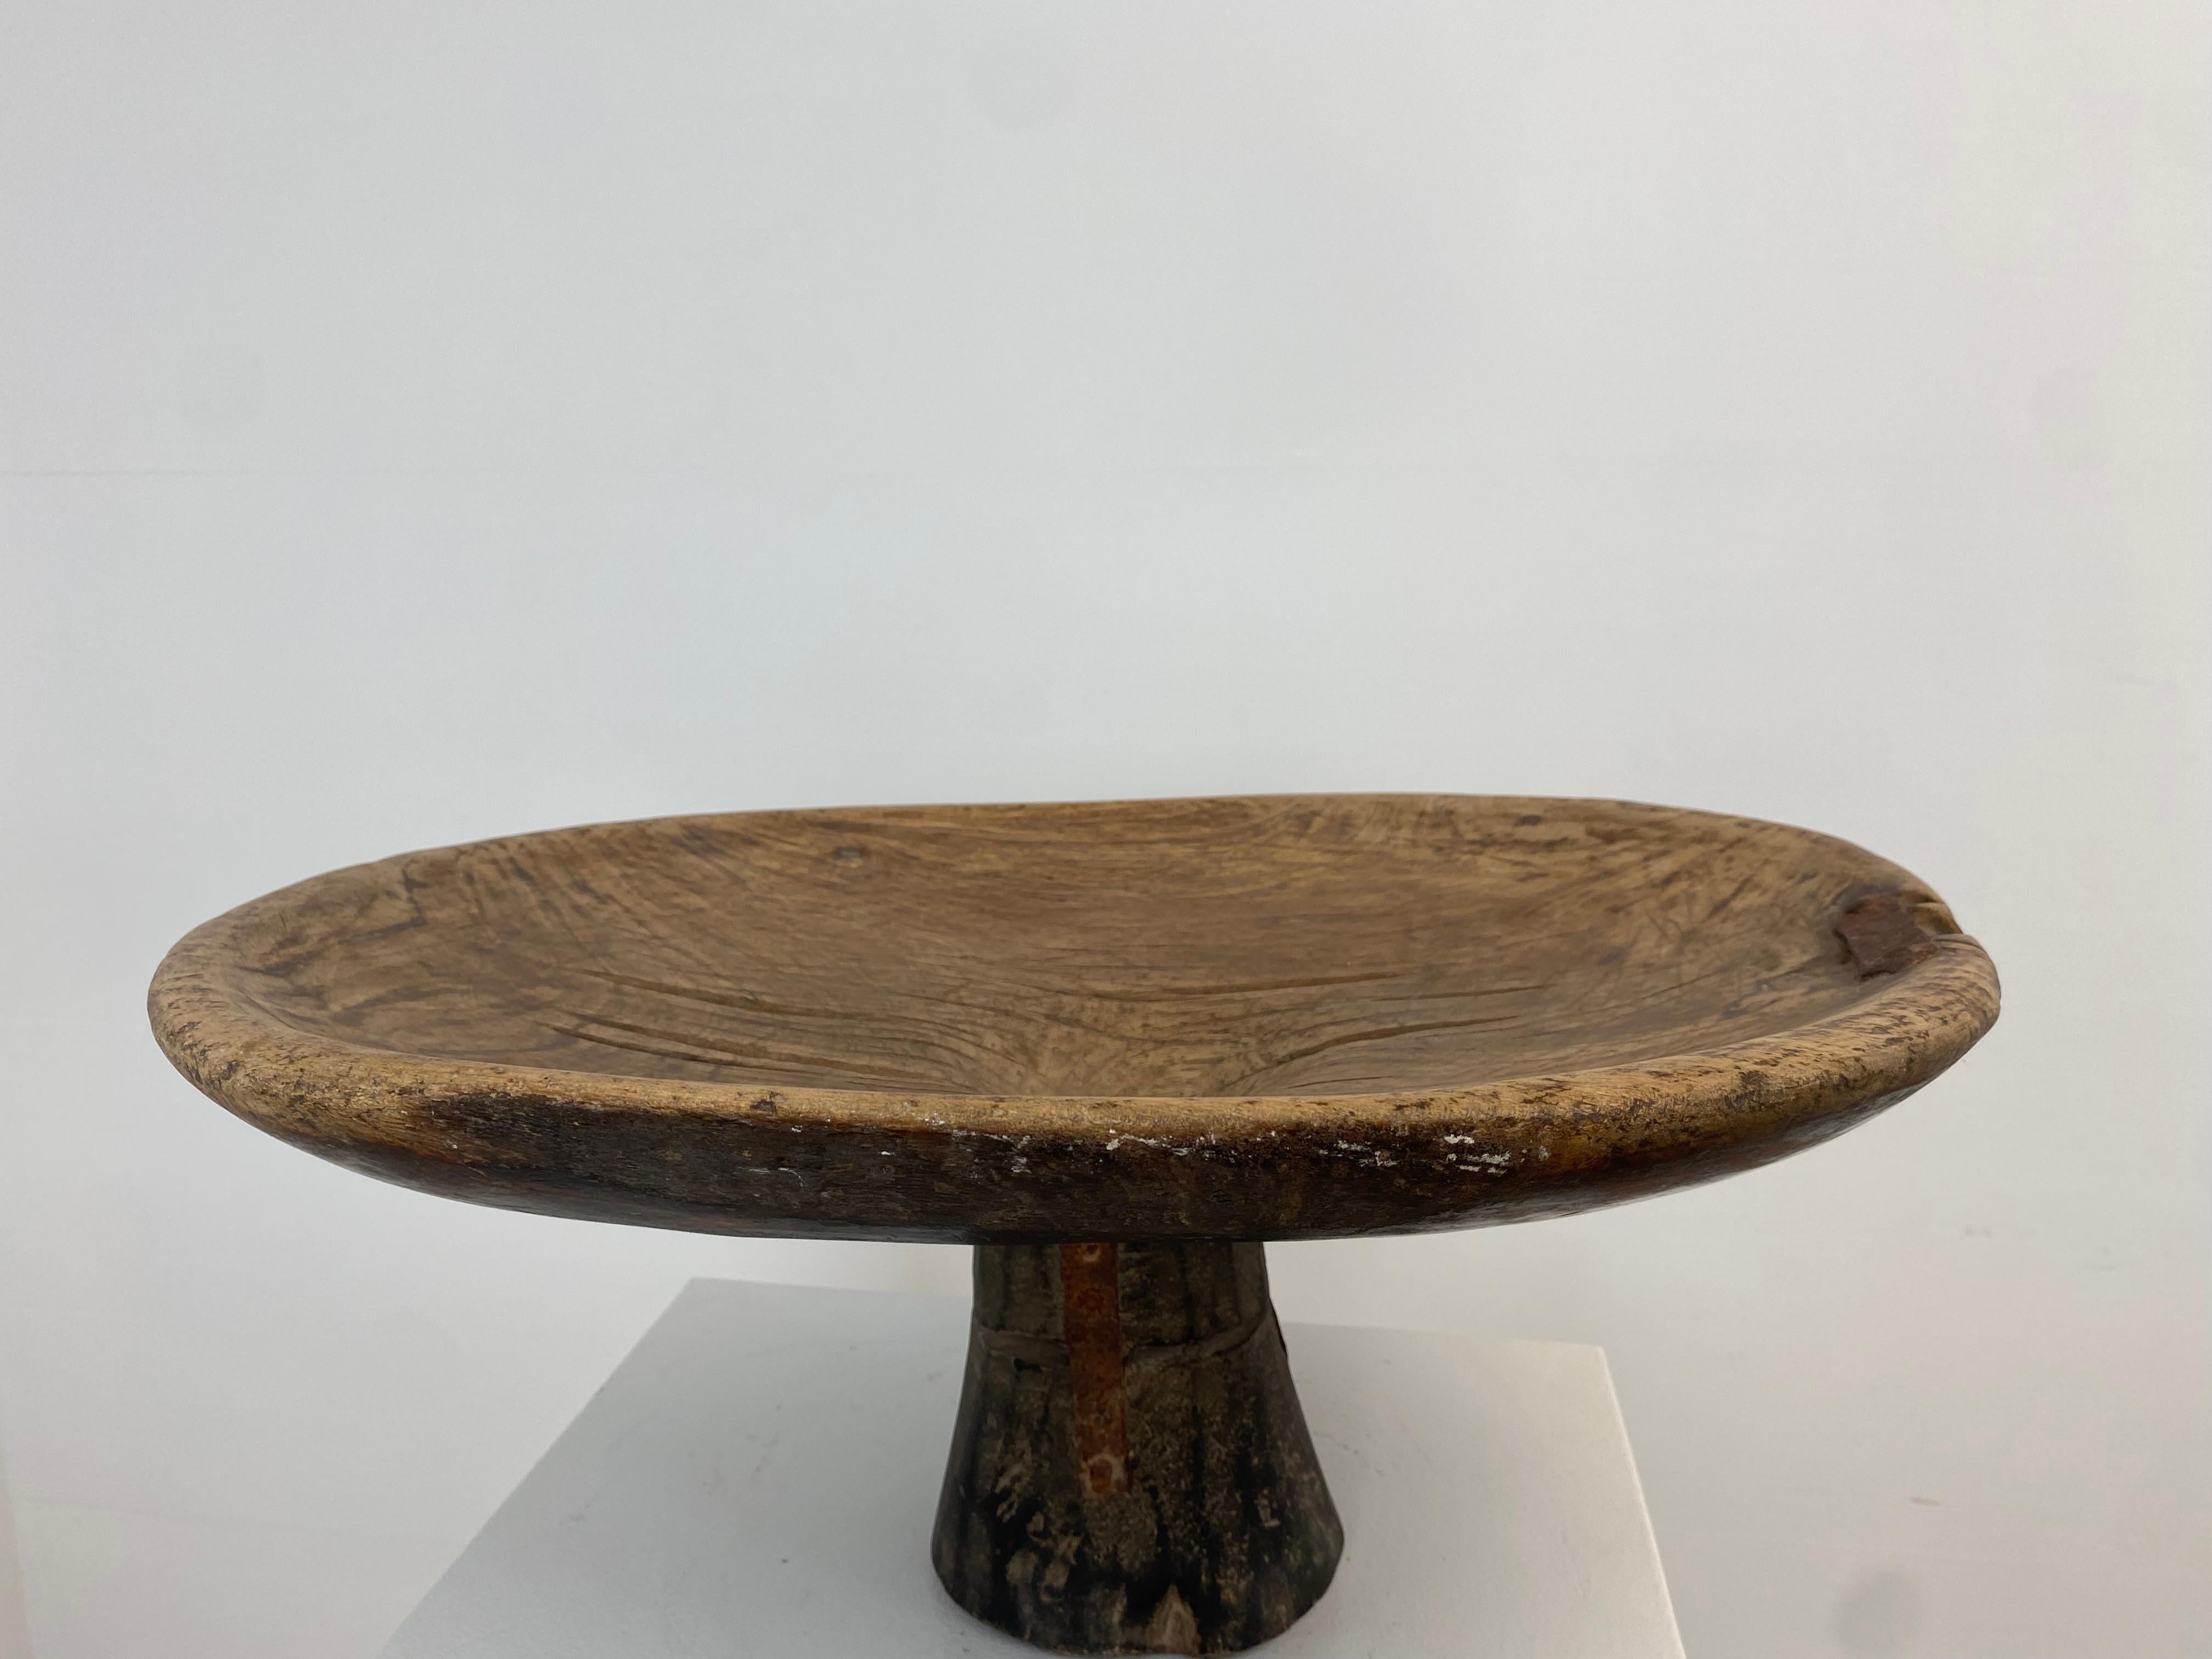 Large and very decorative Wooden Berber Tazza from around 1920,
the wood has a very beautiful old Patina and shine;
there are old metal restorations which give the object an even more 
brutalist aspect,
very decorative object to be used for